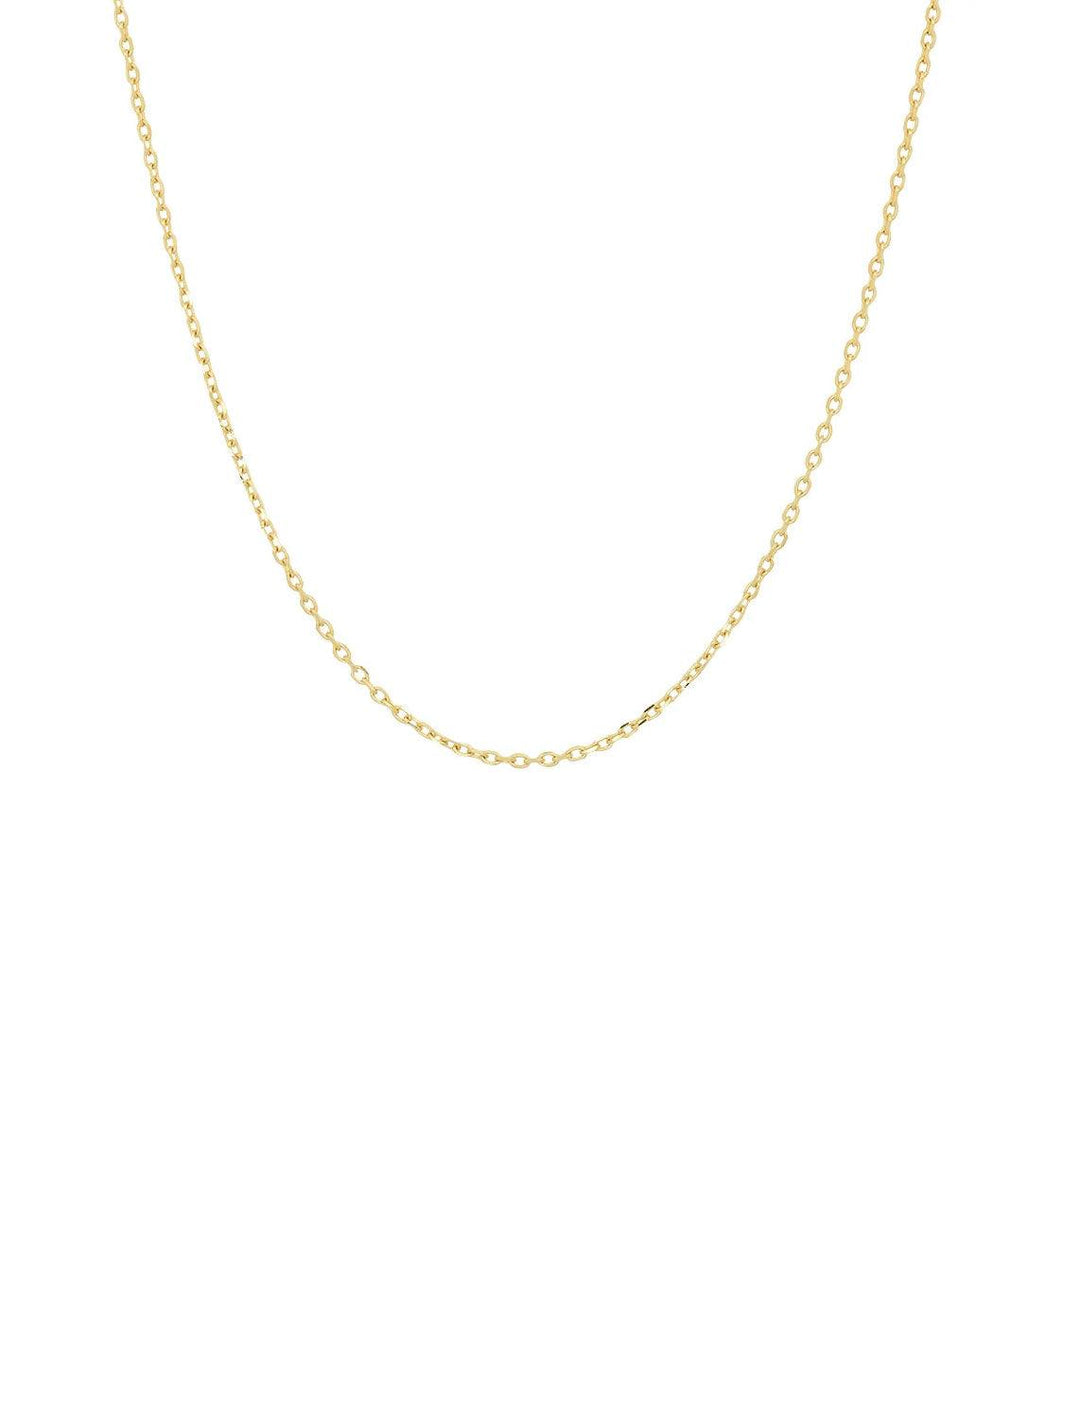 simply linked chain necklace | 16"